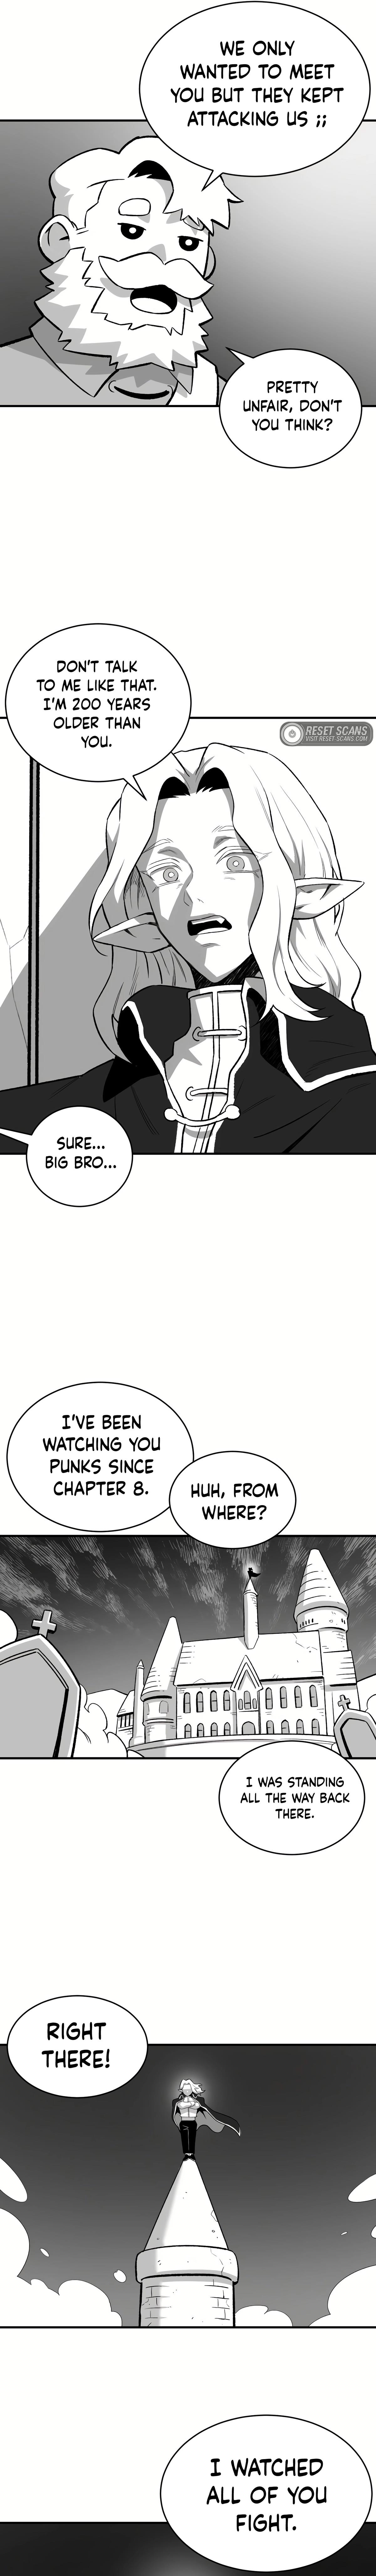 Hammer Gramps - Page 3